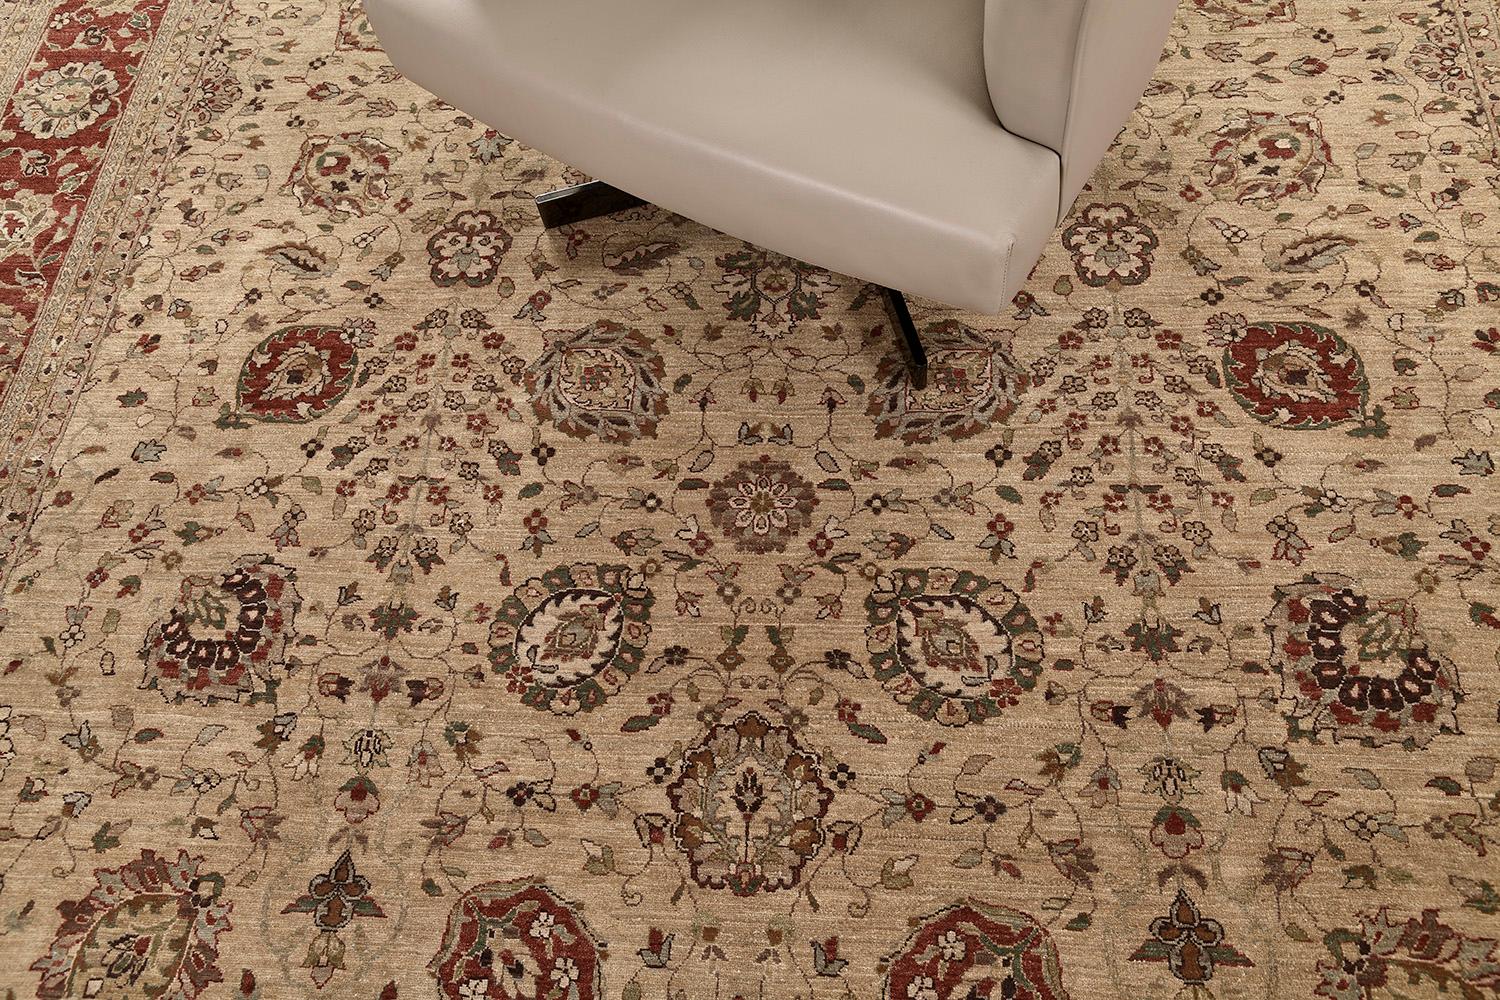 An exceptional Hadji Jalili's Tabriz rug has supremely incorporated the lovely all-over blooming scrolls and traditional Persian designs in an oatmeal field that keeps the pattern very extraordinary. Borders are symmetrically designed which makes